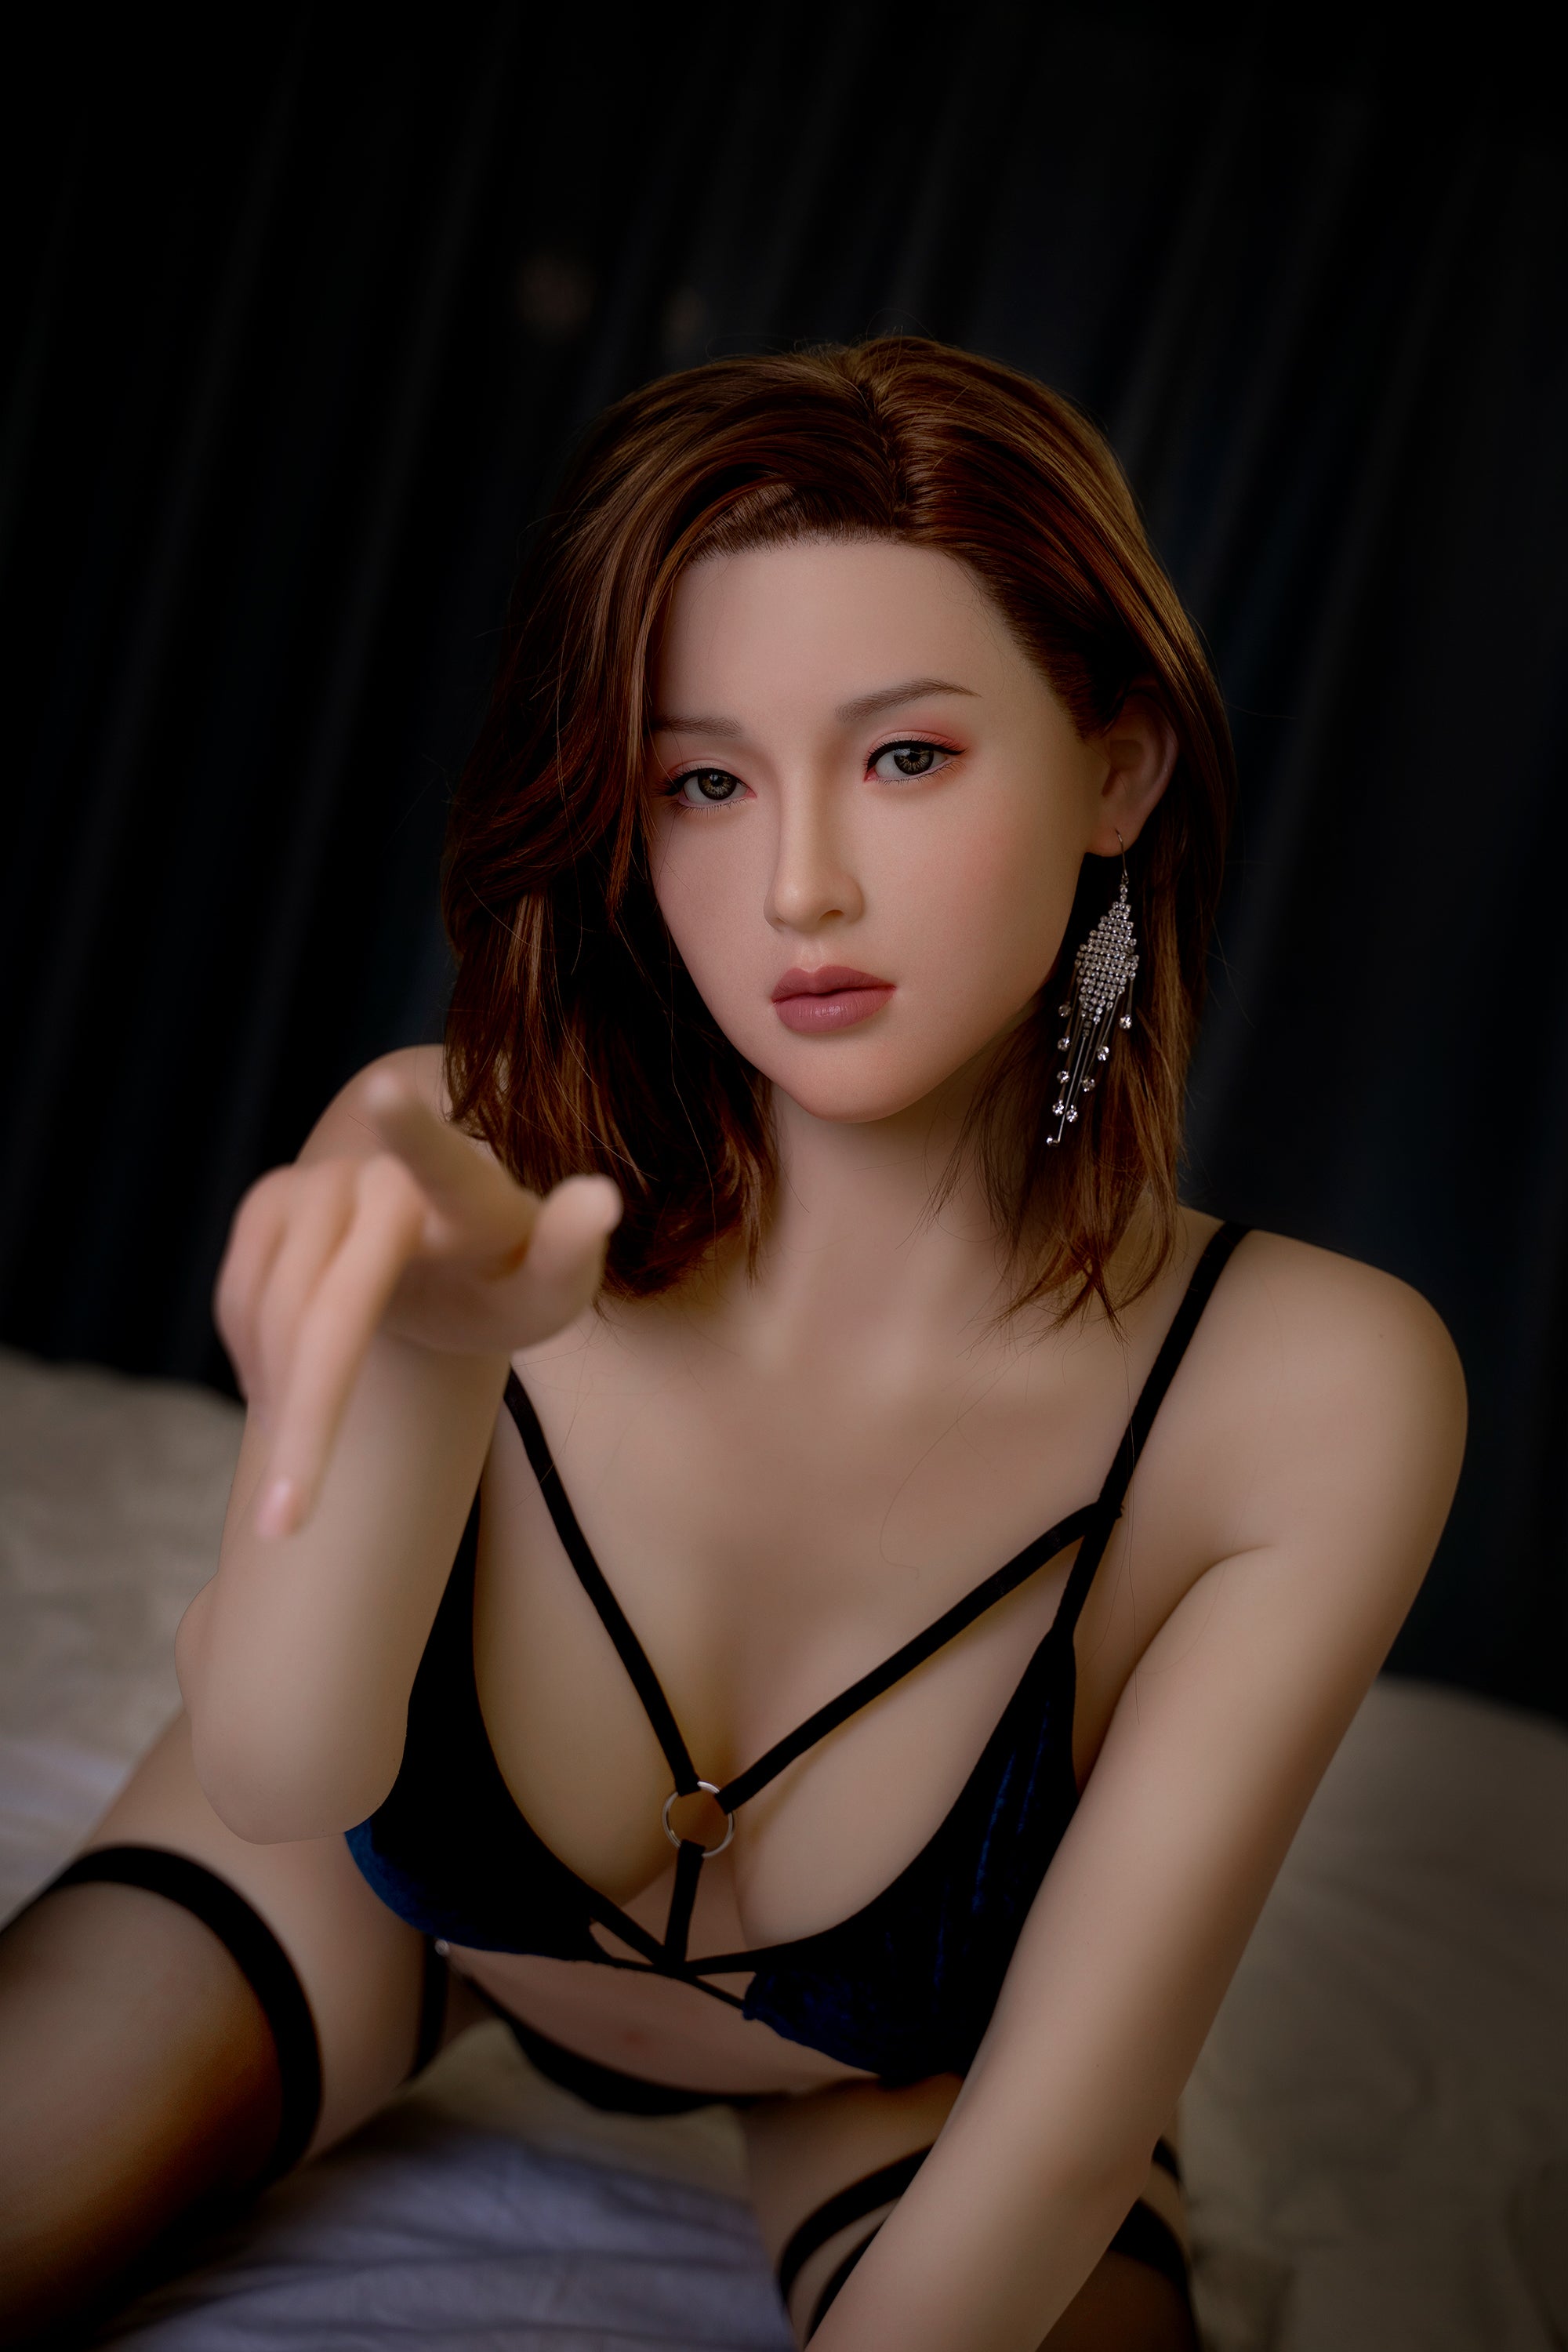 Zelex Doll 170 cm C Fusion - Seraphina | Buy Sex Dolls at DOLLS ACTUALLY